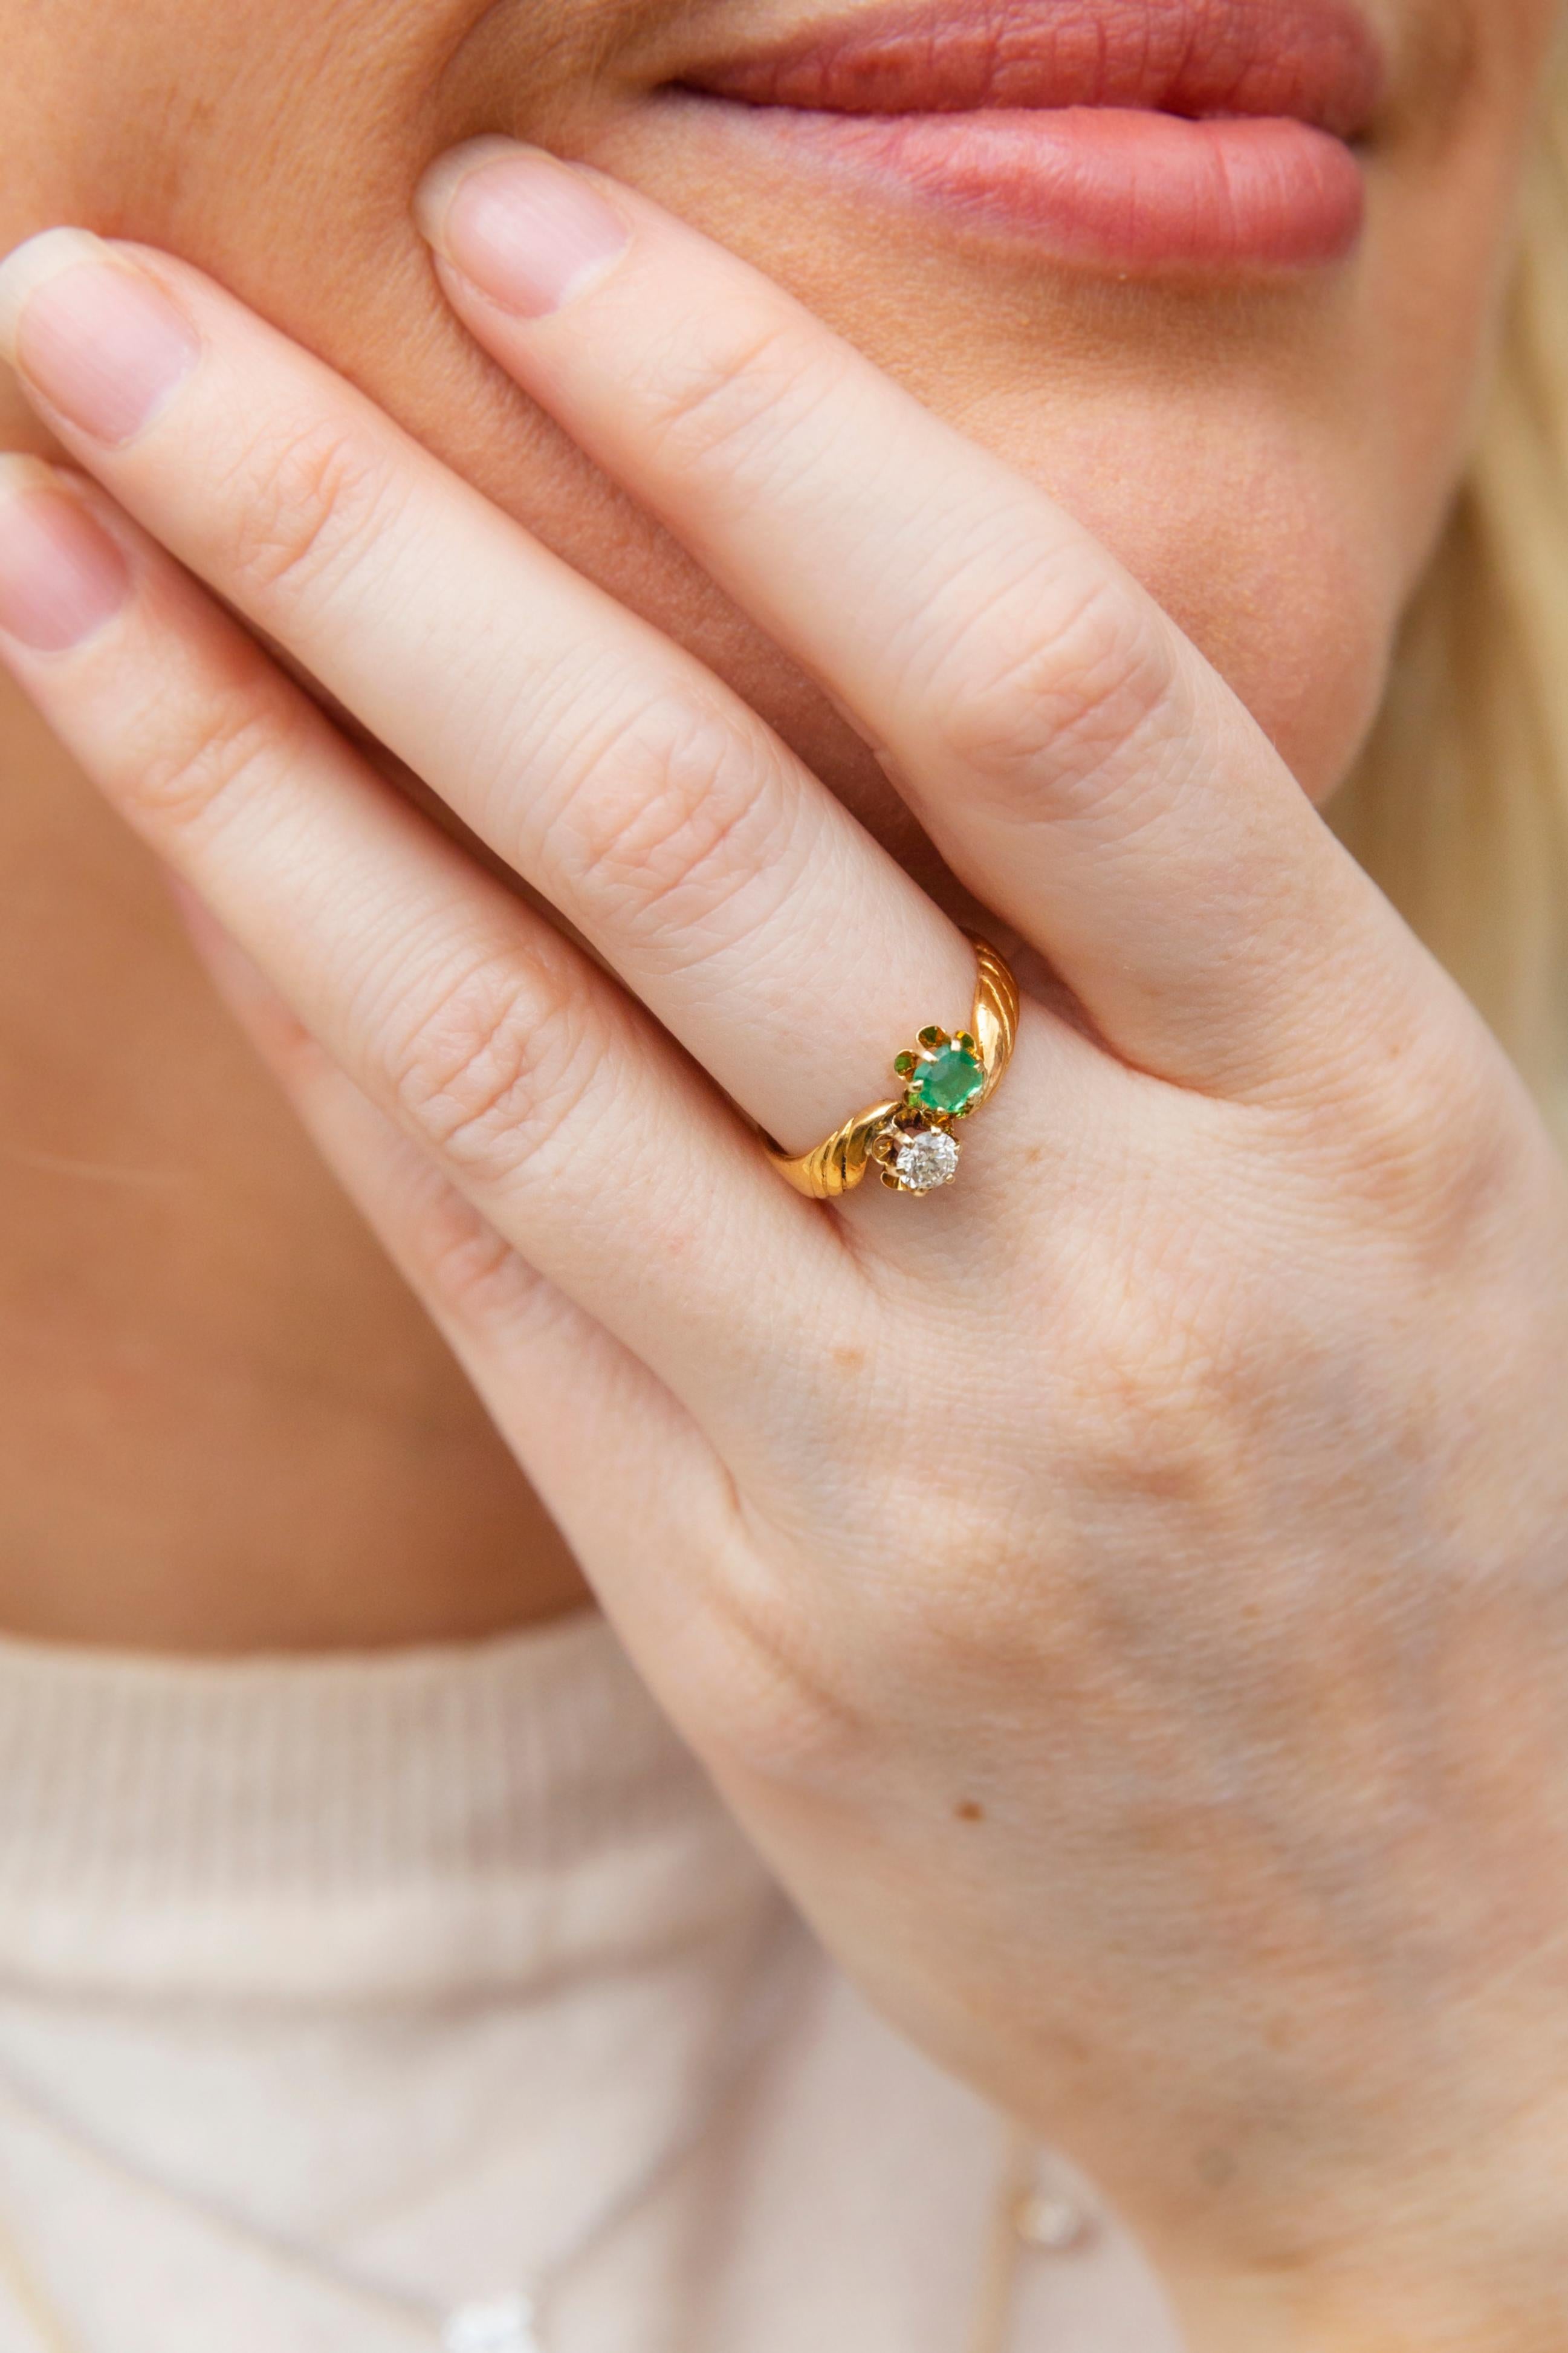 Crafted in 18 carat gold, The Arlene Ring is a vintage joy. Her vivid green emerald and sparkling diamond are cradled in flower baskets raised above a golden band that twists and ribbons around them. A perfect addition to any collection.  

The